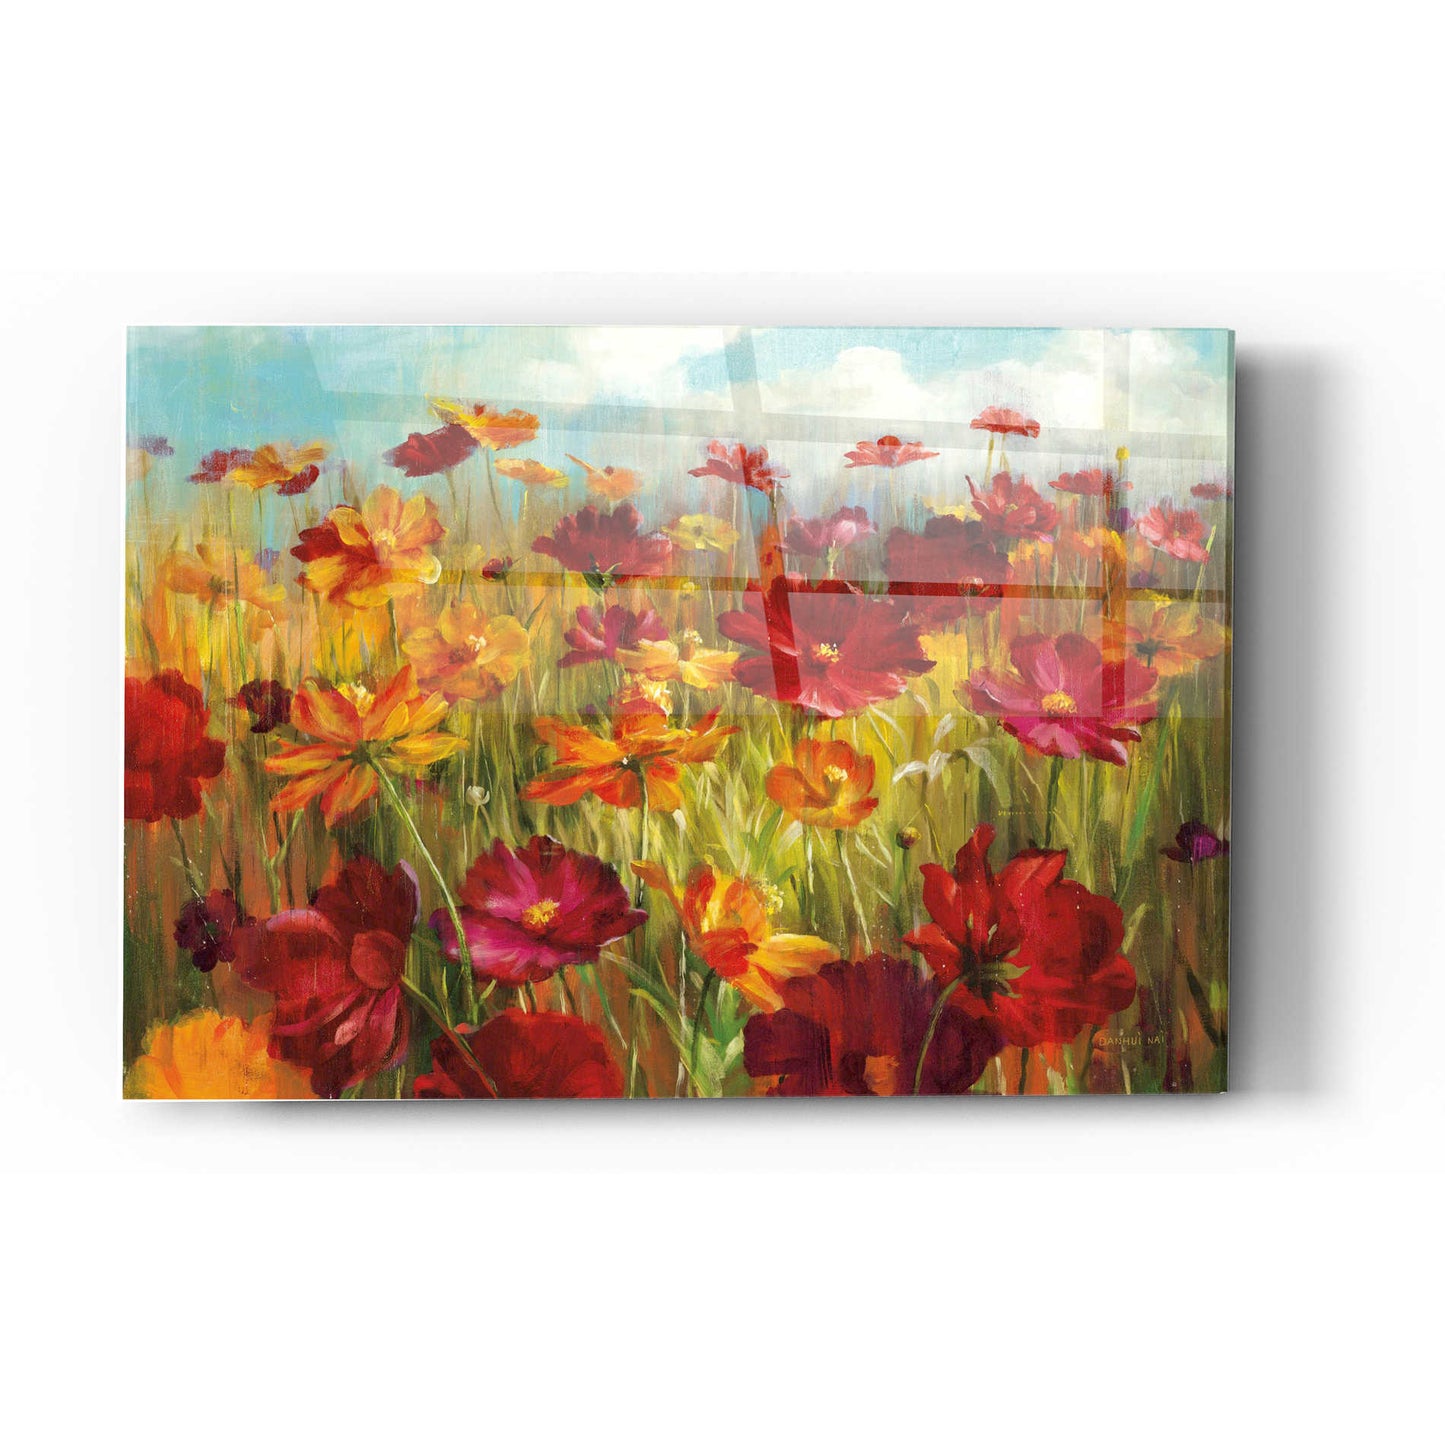 Epic Art 'Cosmos in the Field' by Danhui Nai, Acrylic Glass Wall Art,12 x 16